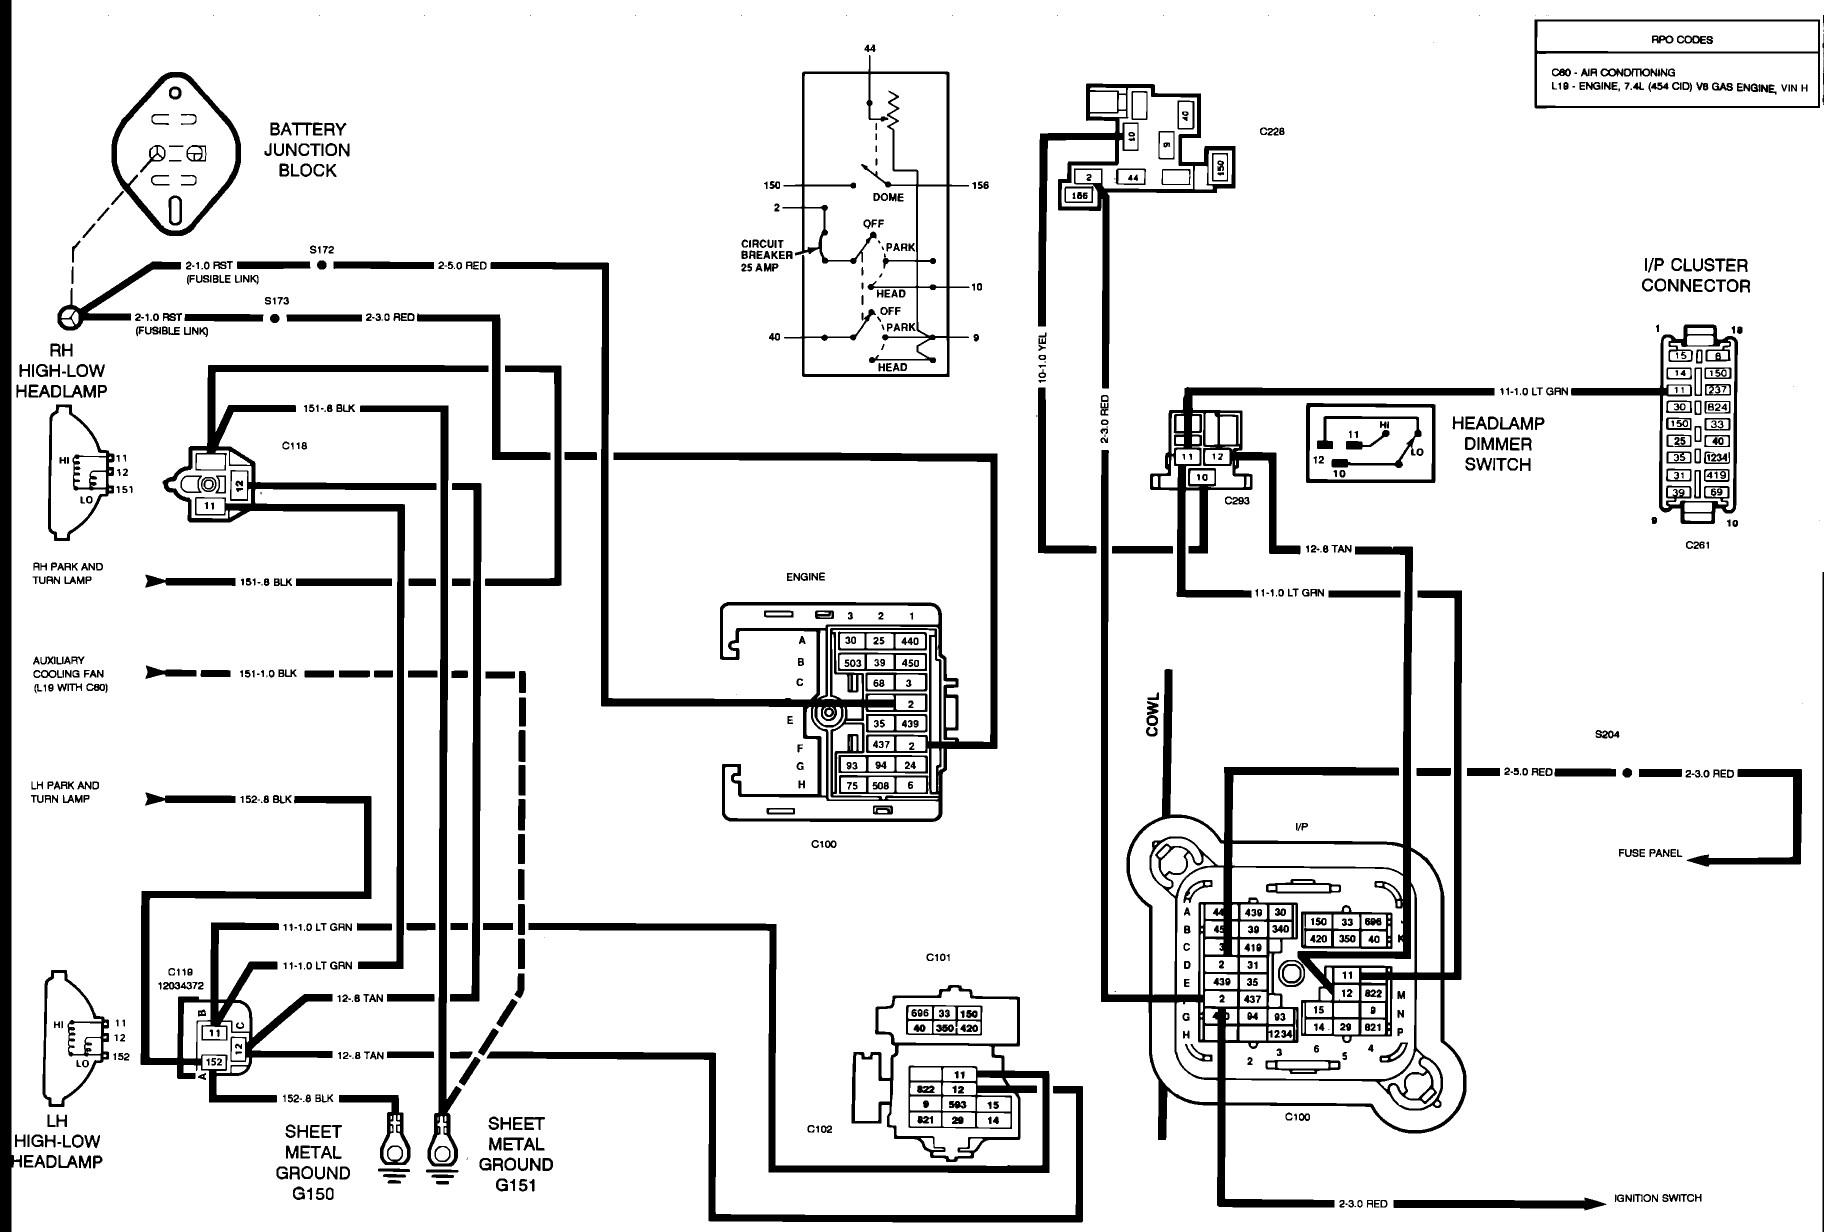 86 Chevy Truck Wiring Diagram Pin by Ayaco 011 On Auto Manual Parts Wiring Diagram Of 86 Chevy Truck Wiring Diagram